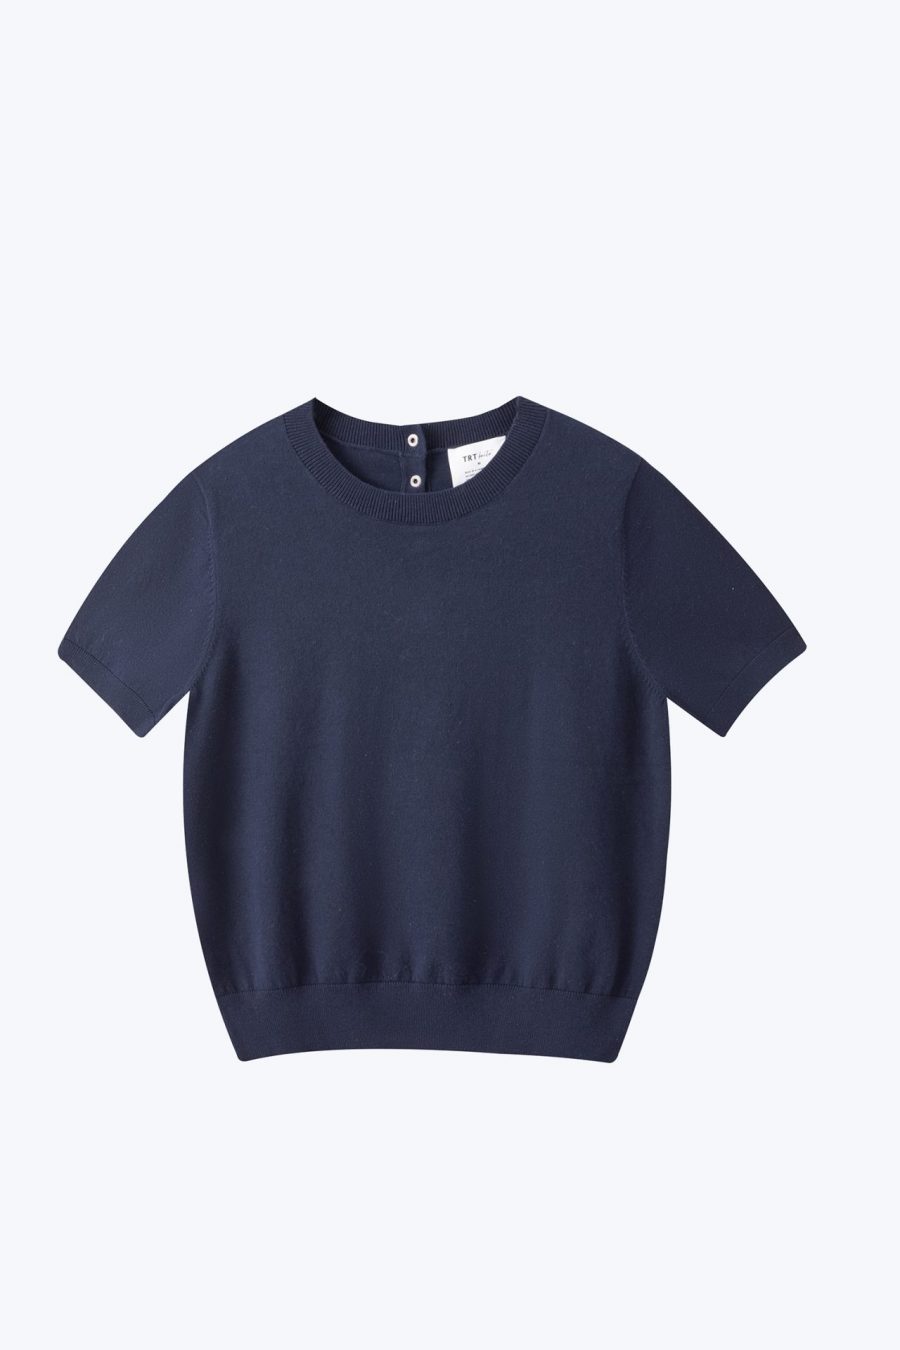 WK000044S Knit Reg Ss Top With Back Neck Buttons NAVY